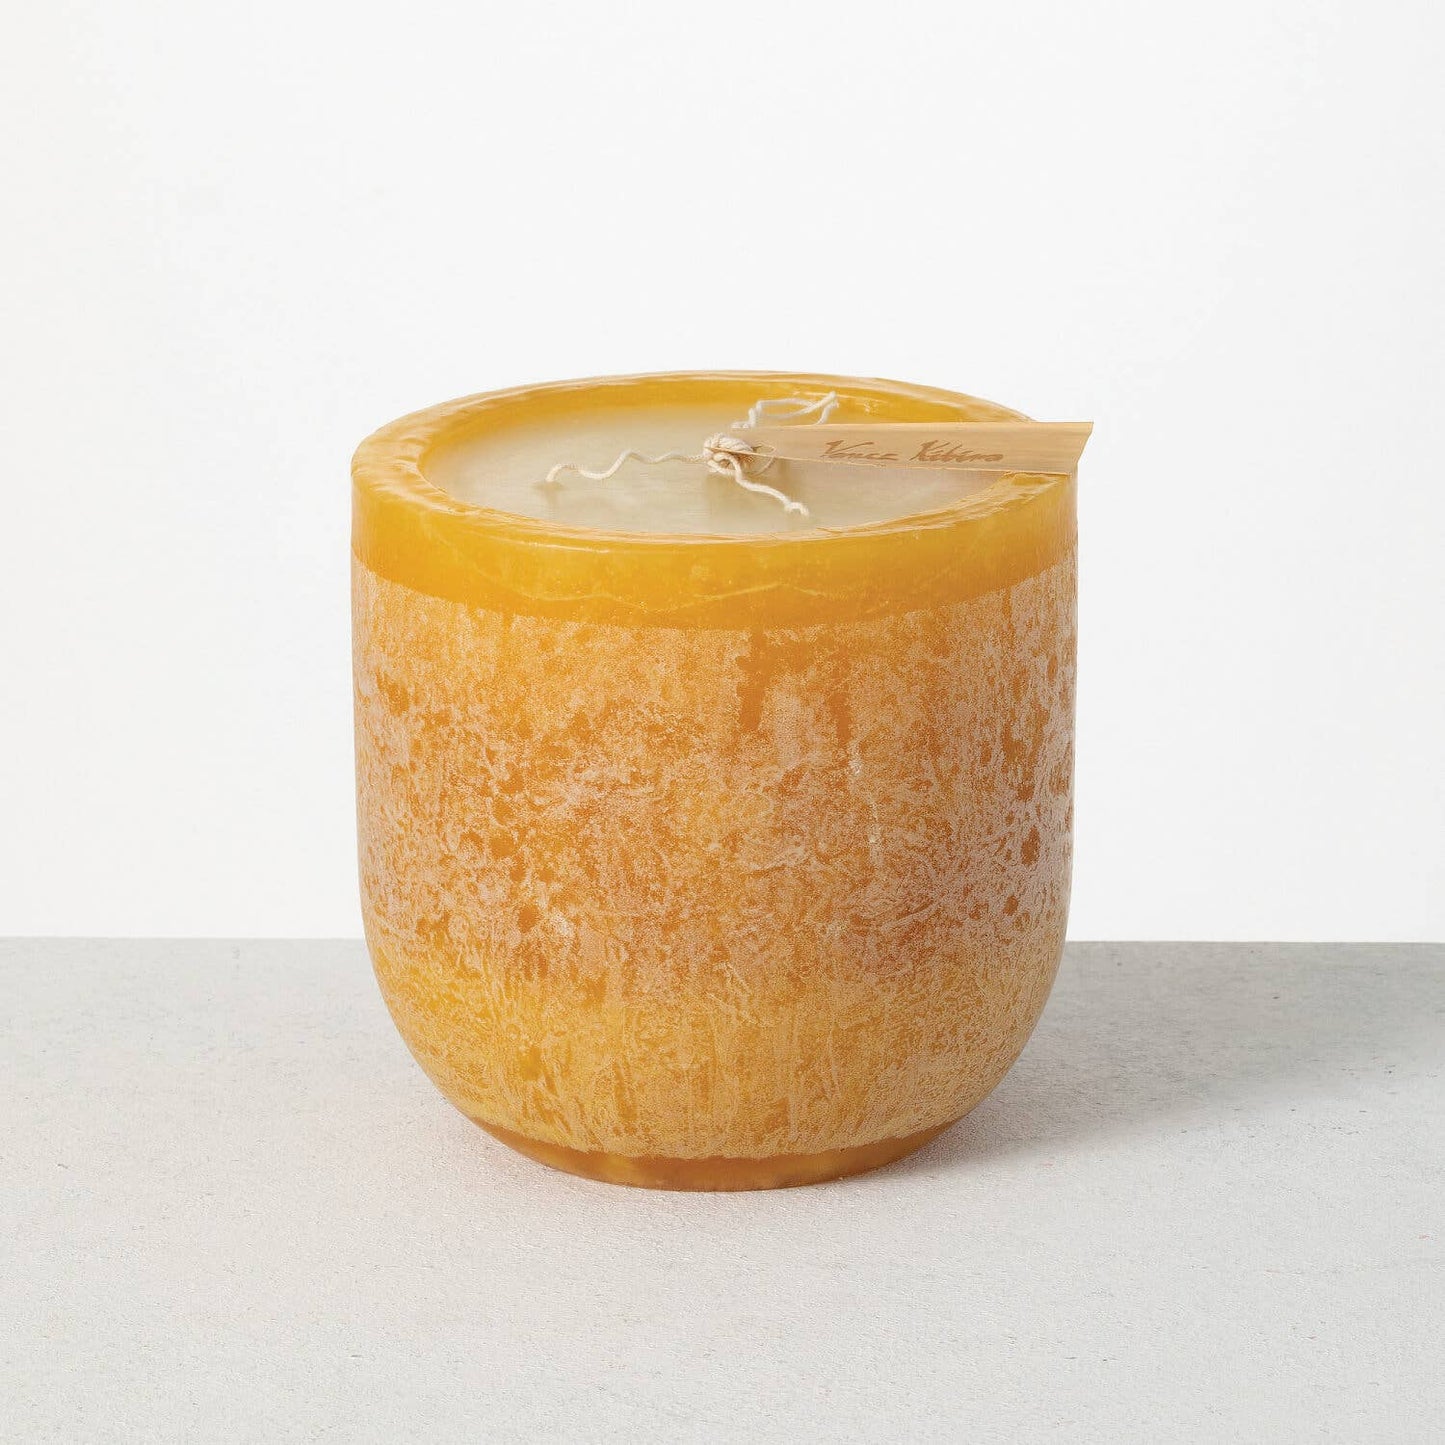 6" x 6" Goblet Candle - Brown Sugar